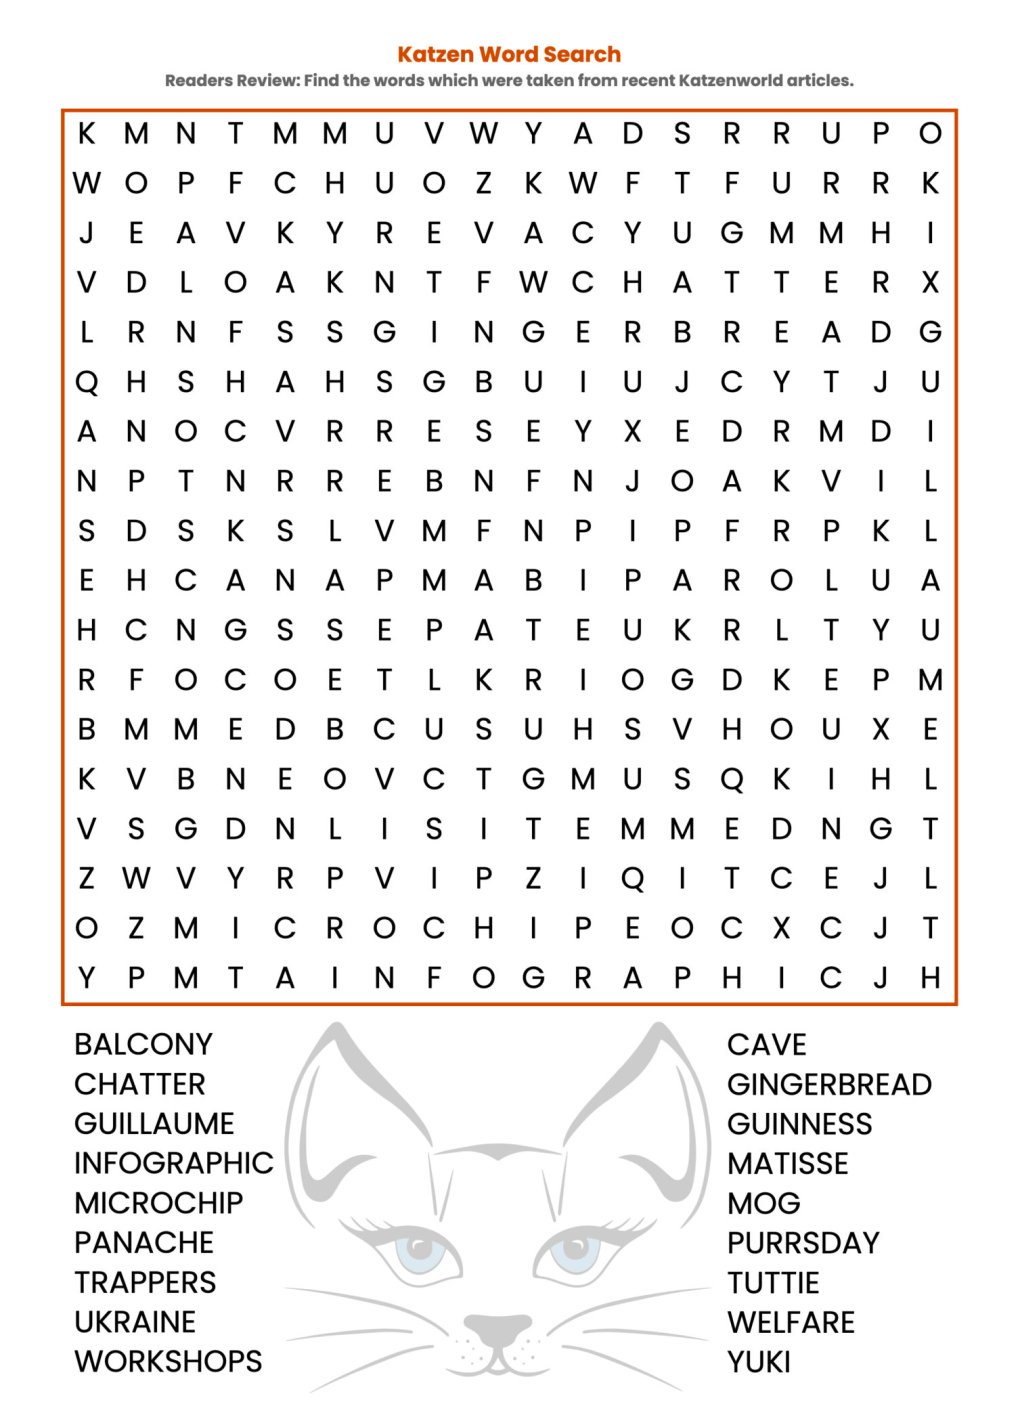 Weekly Cat Word Puzzle – Katzen Word Search